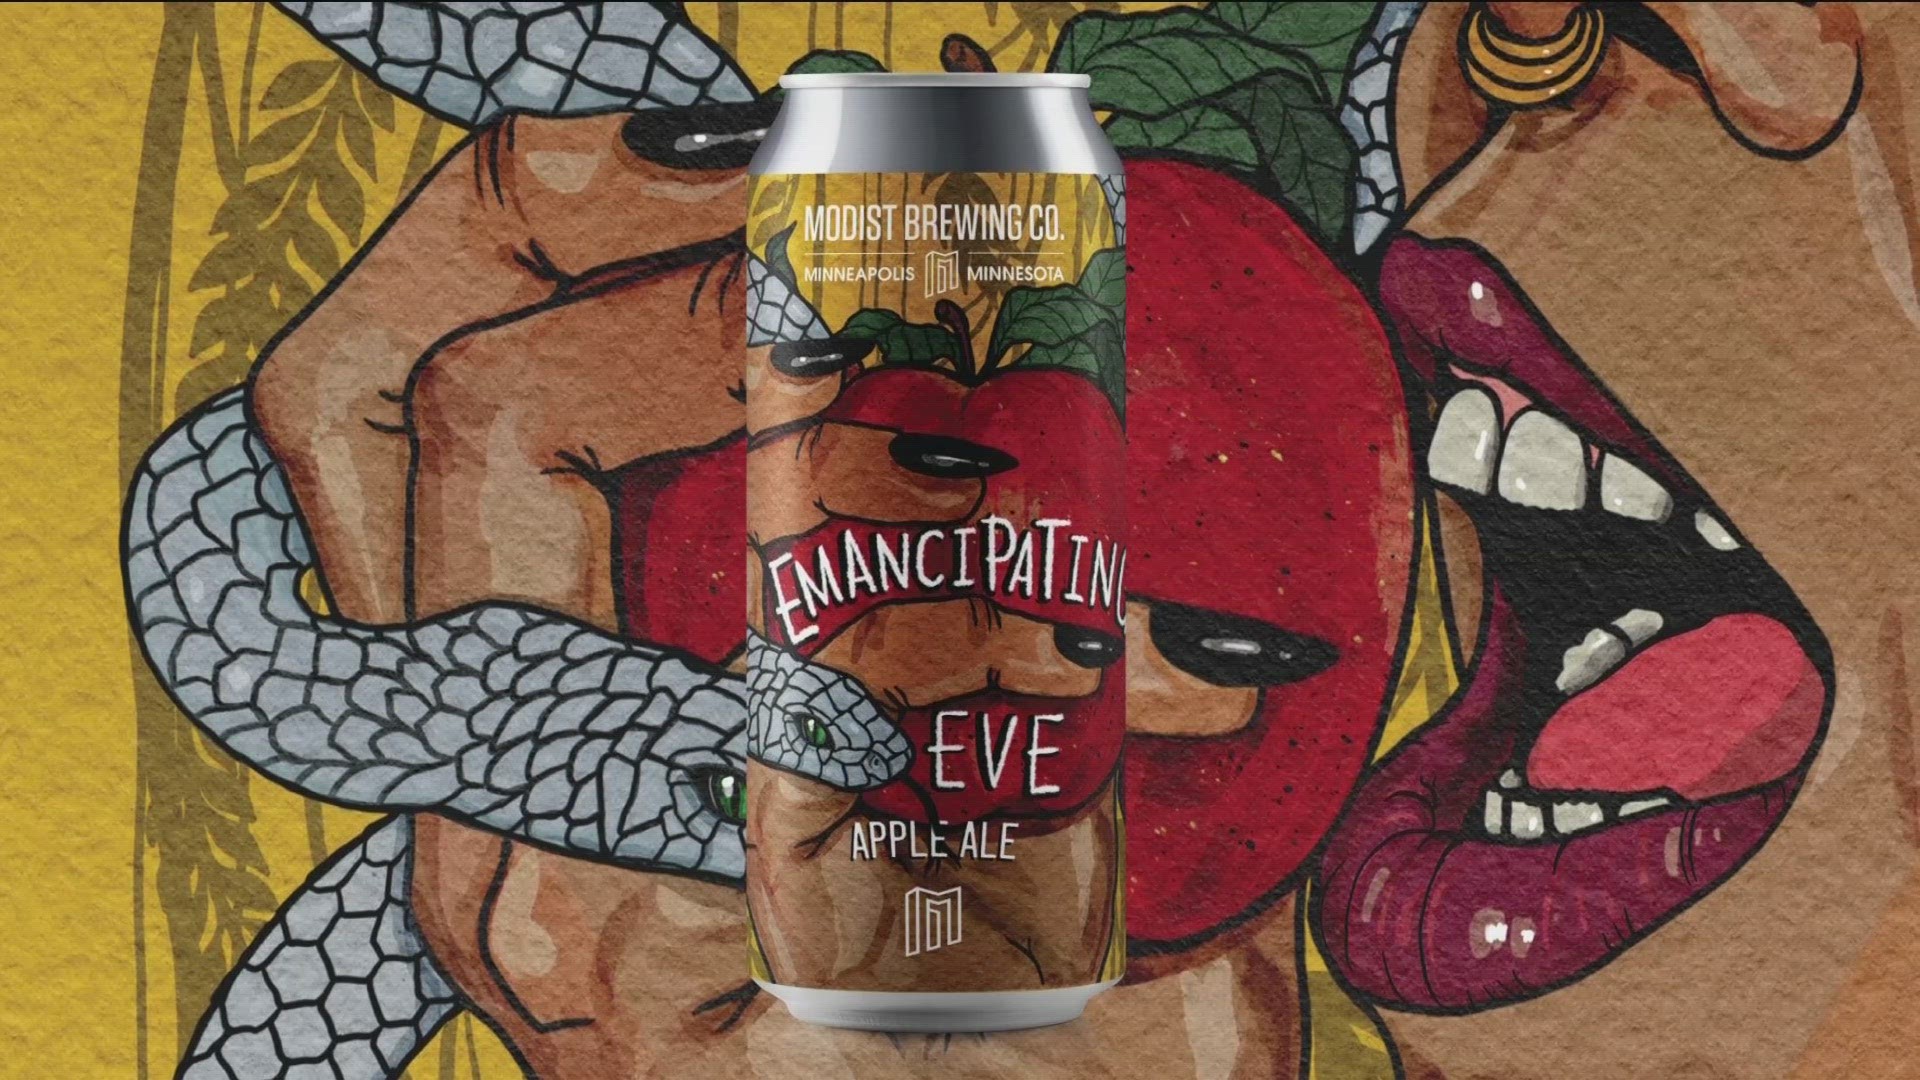 Emancipating Eve, Tenacious She, Peachy Kween – these are just some of the beers this year.